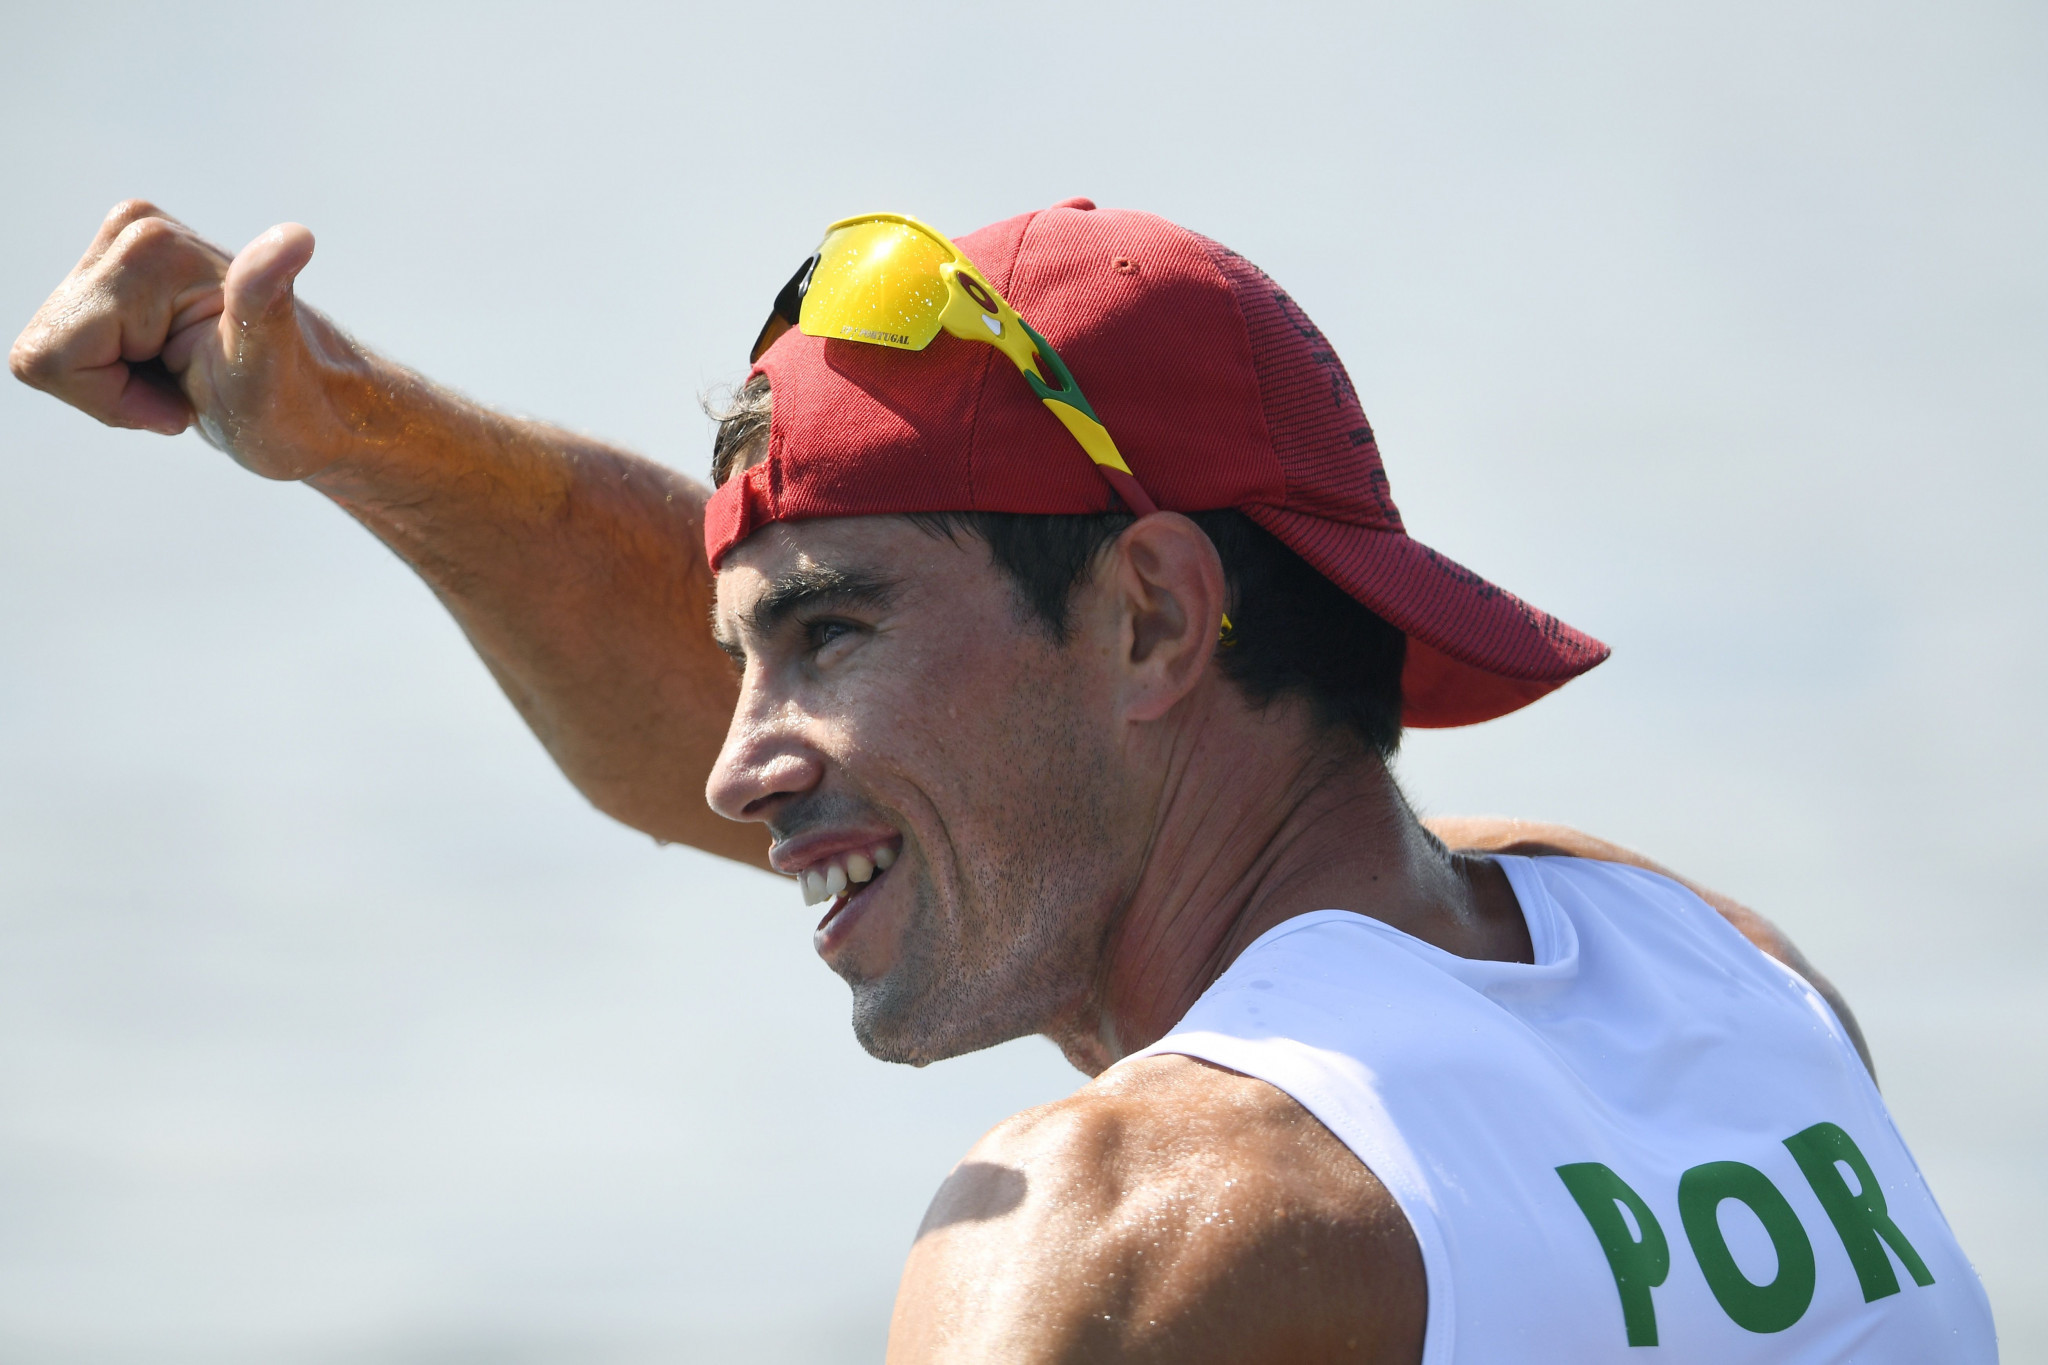 Portugal's Fernando Pimenta recorded the fastest times in the men's K1 500 metre and 1000m semi-finals at the ICF Canoe Sprint World Cup ©Getty Images